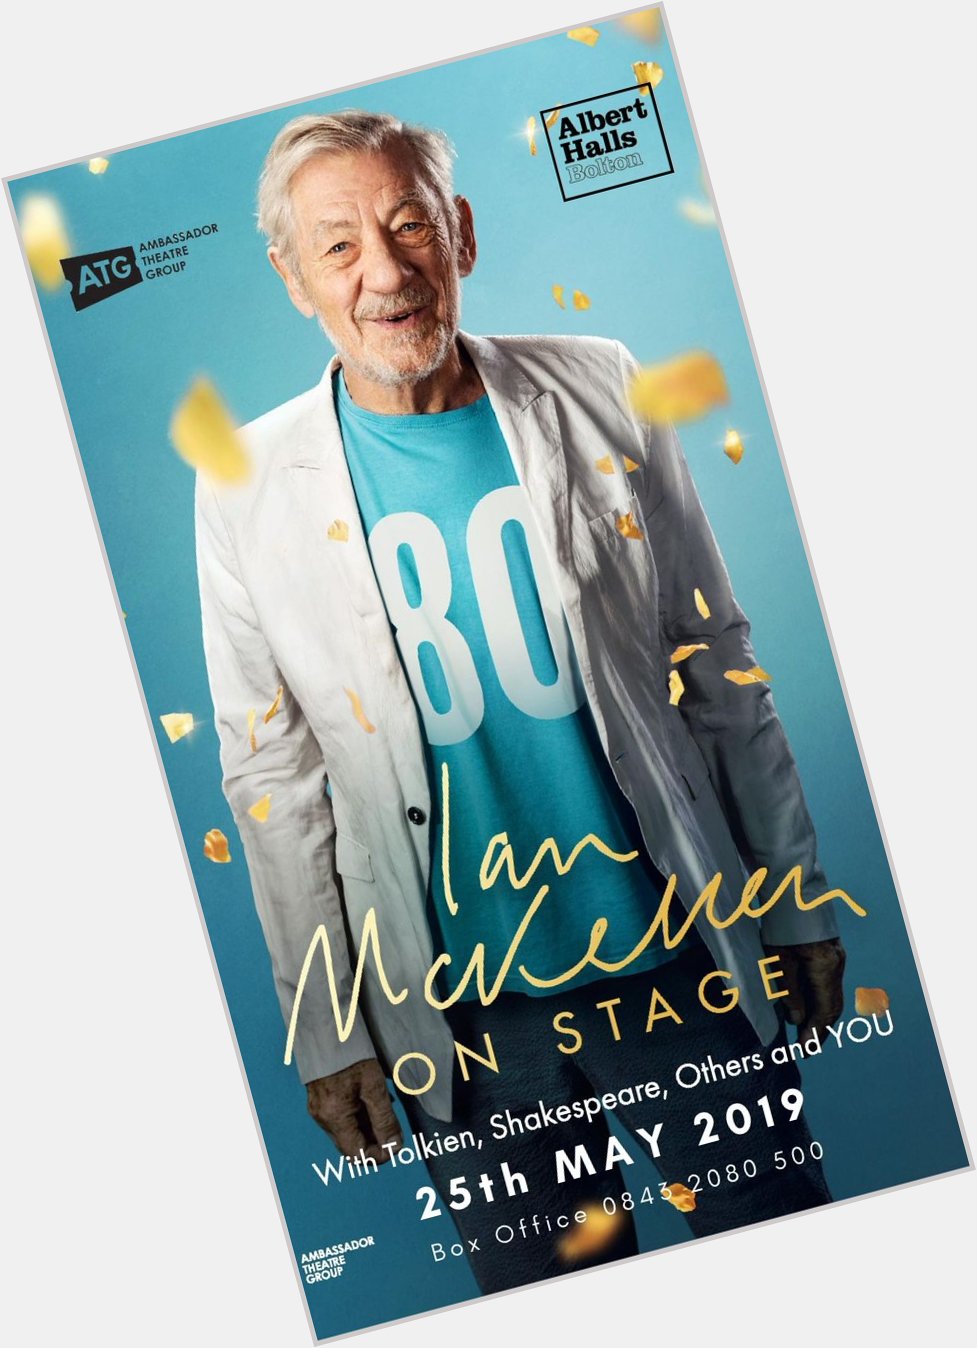 Happy 80th Birthday Sir Ian McKellen. We look forward to welcoming you to the Albert Halls this evening. 